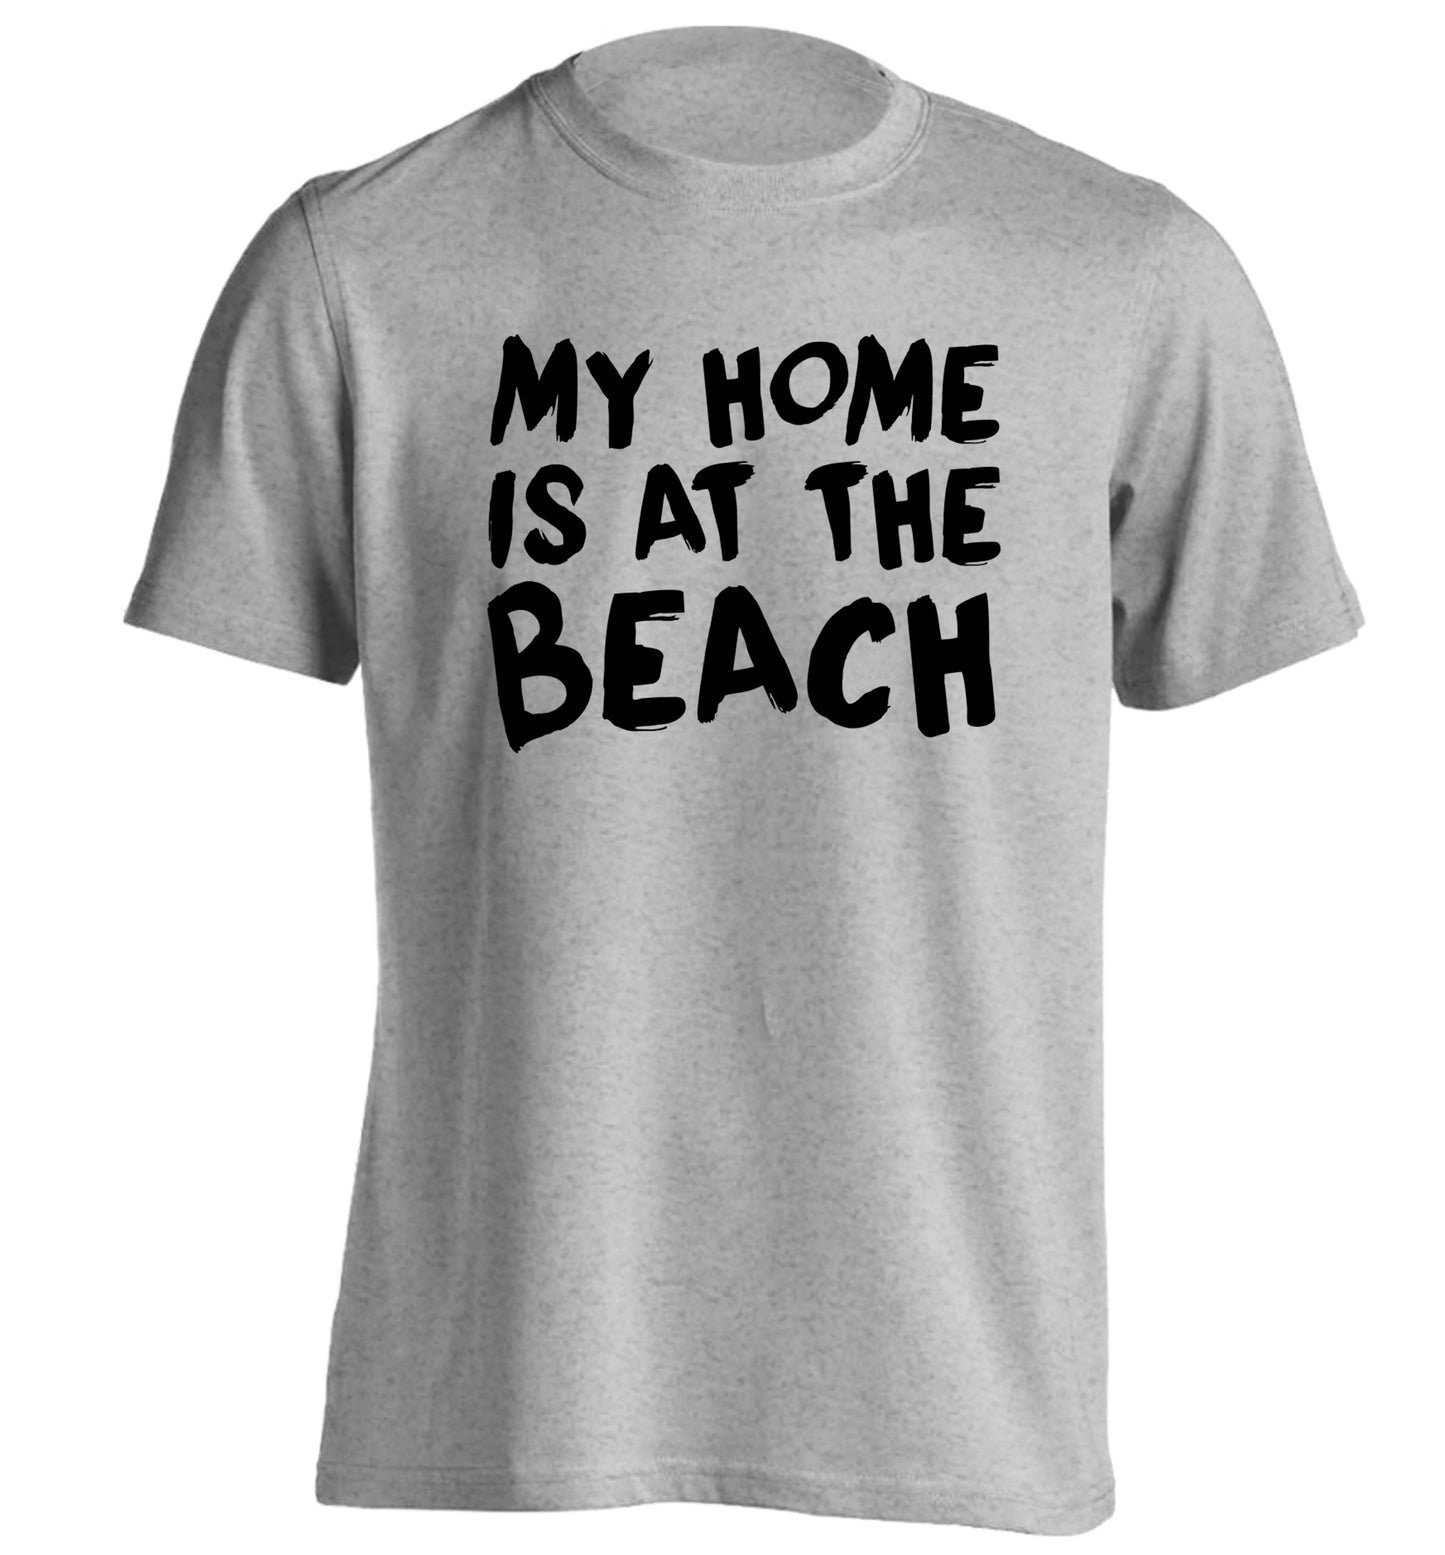 My home is at the beach adults unisex grey Tshirt 2XL